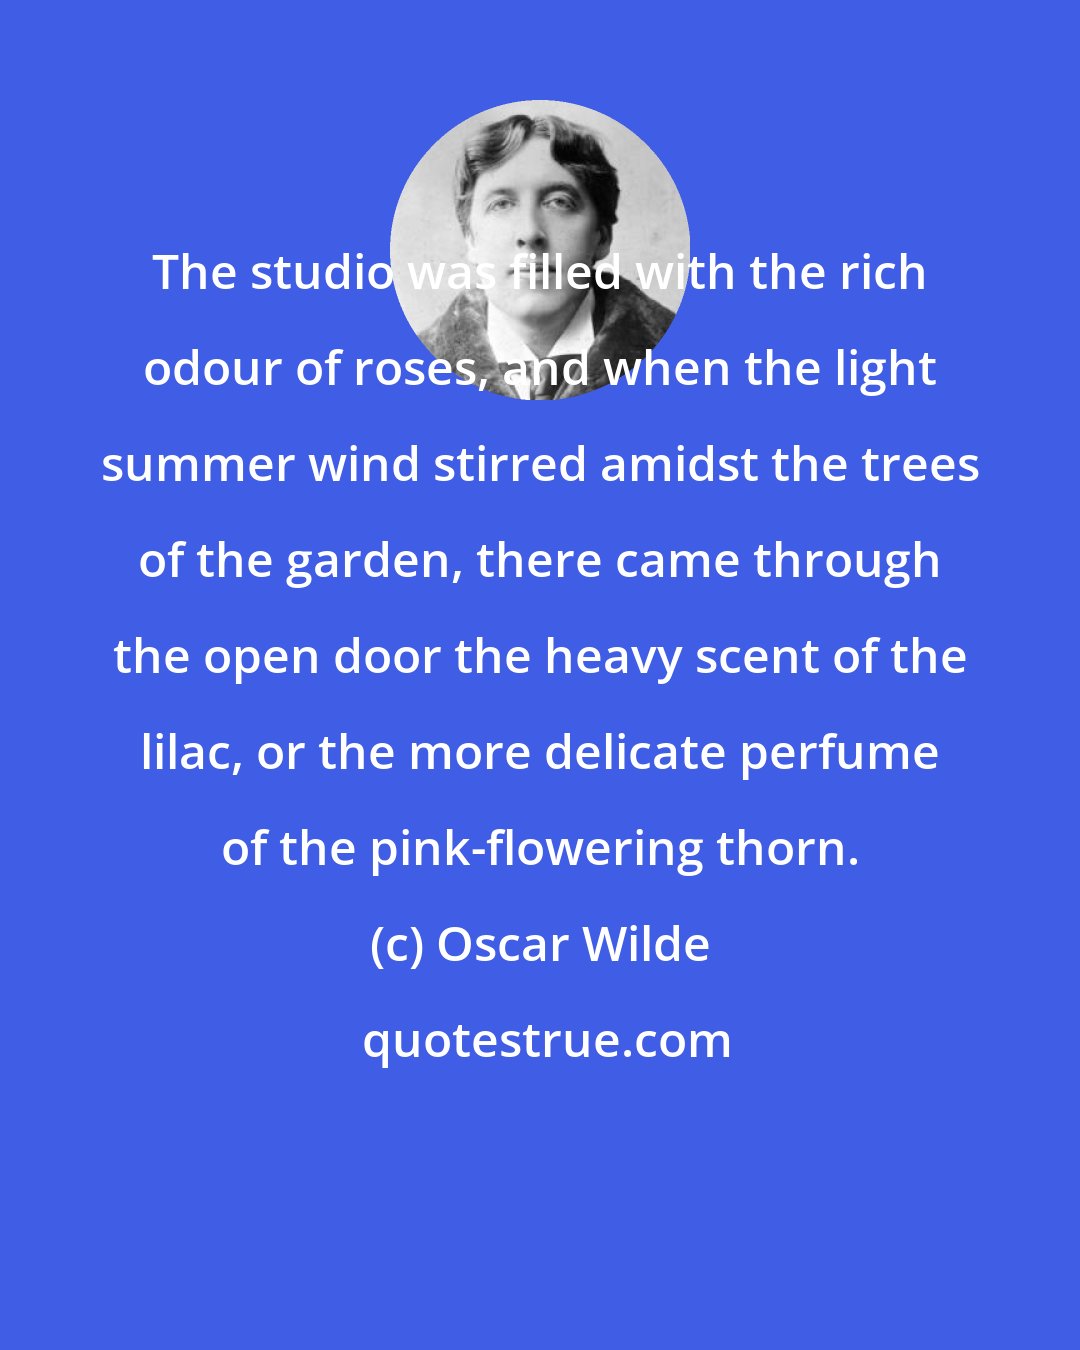 Oscar Wilde: The studio was filled with the rich odour of roses, and when the light summer wind stirred amidst the trees of the garden, there came through the open door the heavy scent of the lilac, or the more delicate perfume of the pink-flowering thorn.